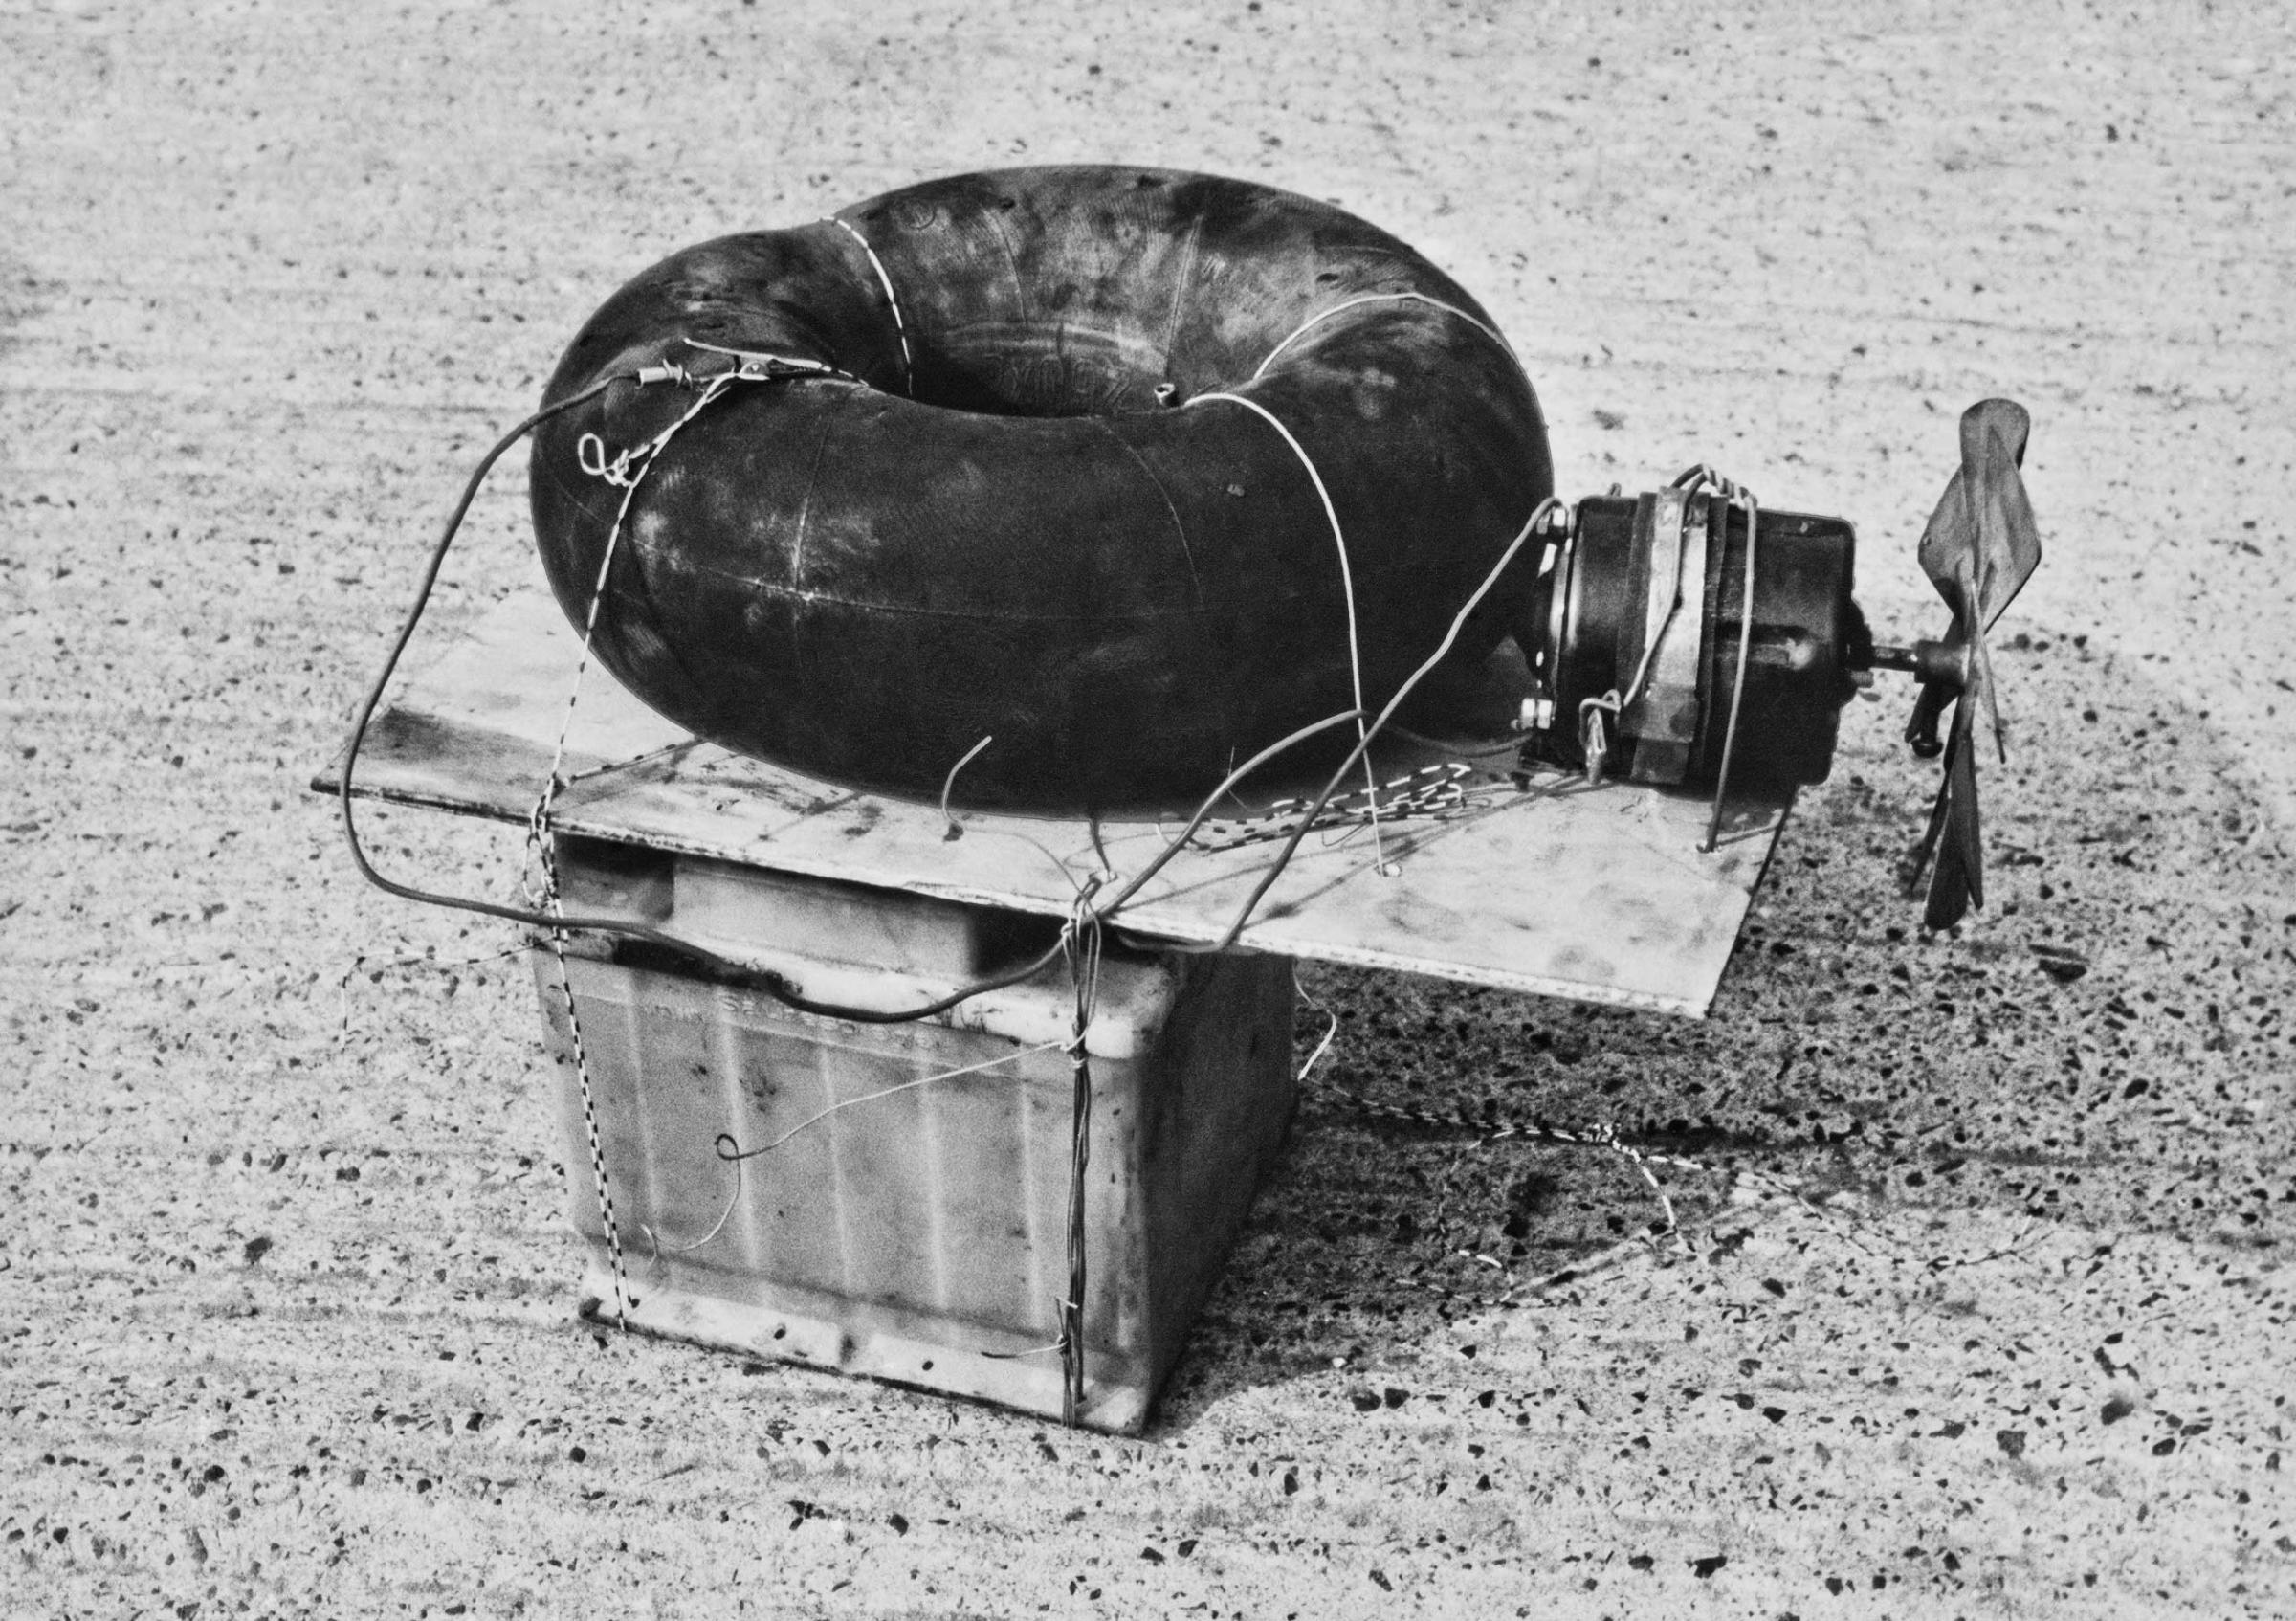 Arwed Messmer, using a print, call number BStU MfS BV RsT Abt. IX Nr. 200, Bl. 2.Homemade float made of a car tire tube, fan motor, and car battery by a car body maker from the state enterprise VEB Sachsenring Zwickau. After he was arrested on June 26, 1989, at 9.30 pm, he admitted under interrogation that he had wanted to escape via the Baltic Sea at Boltenhagen the same evening.